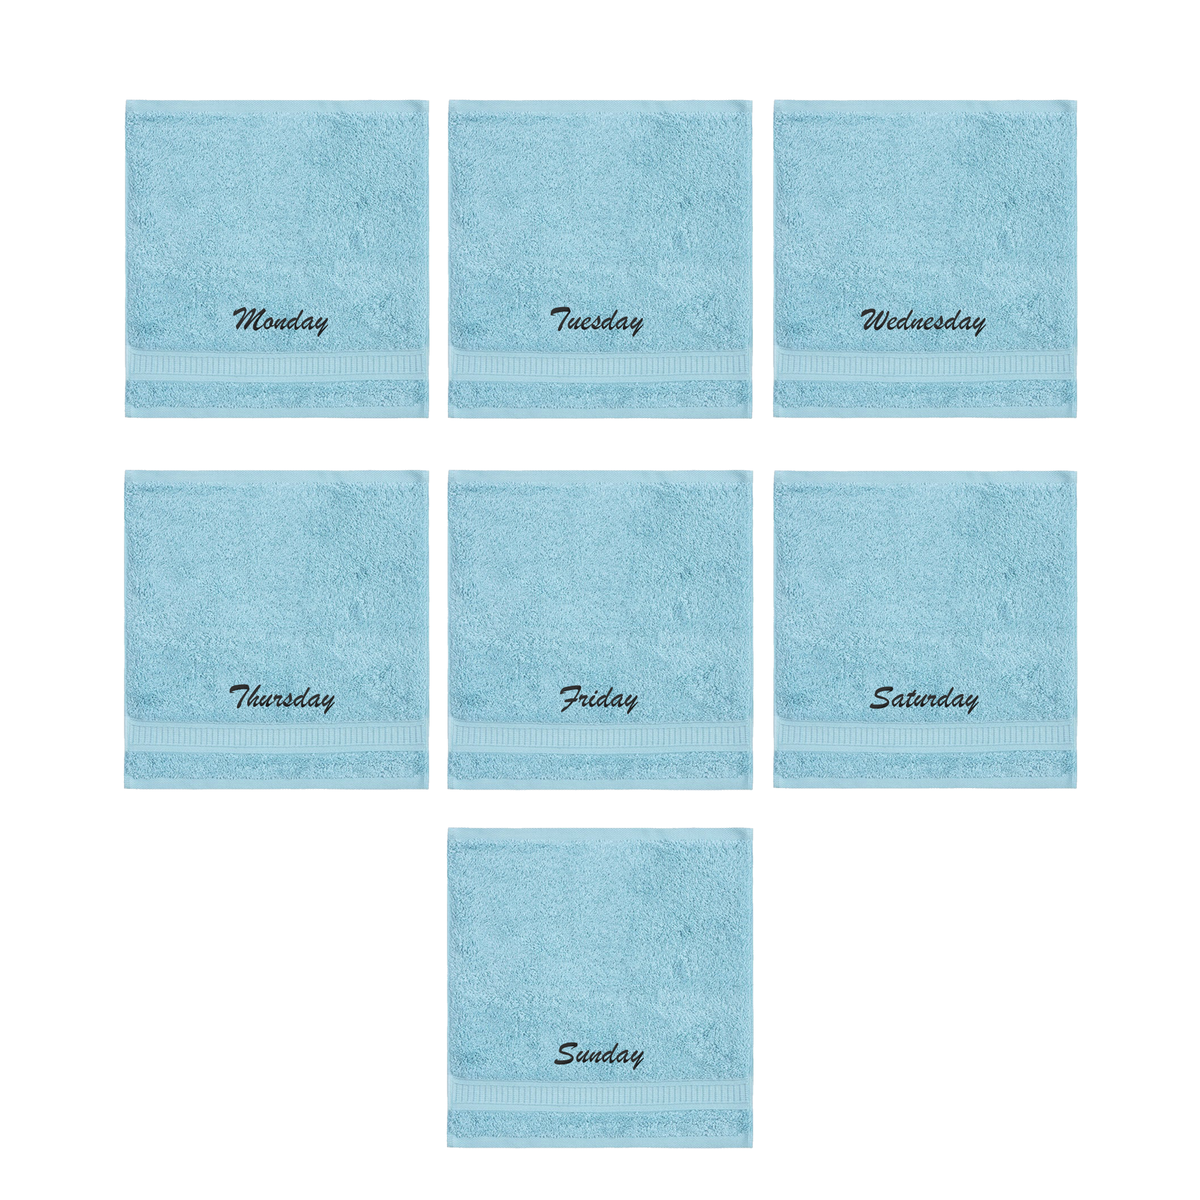 Customized Seven Days Towels - Washcloths and Hand Towels - Set of 7